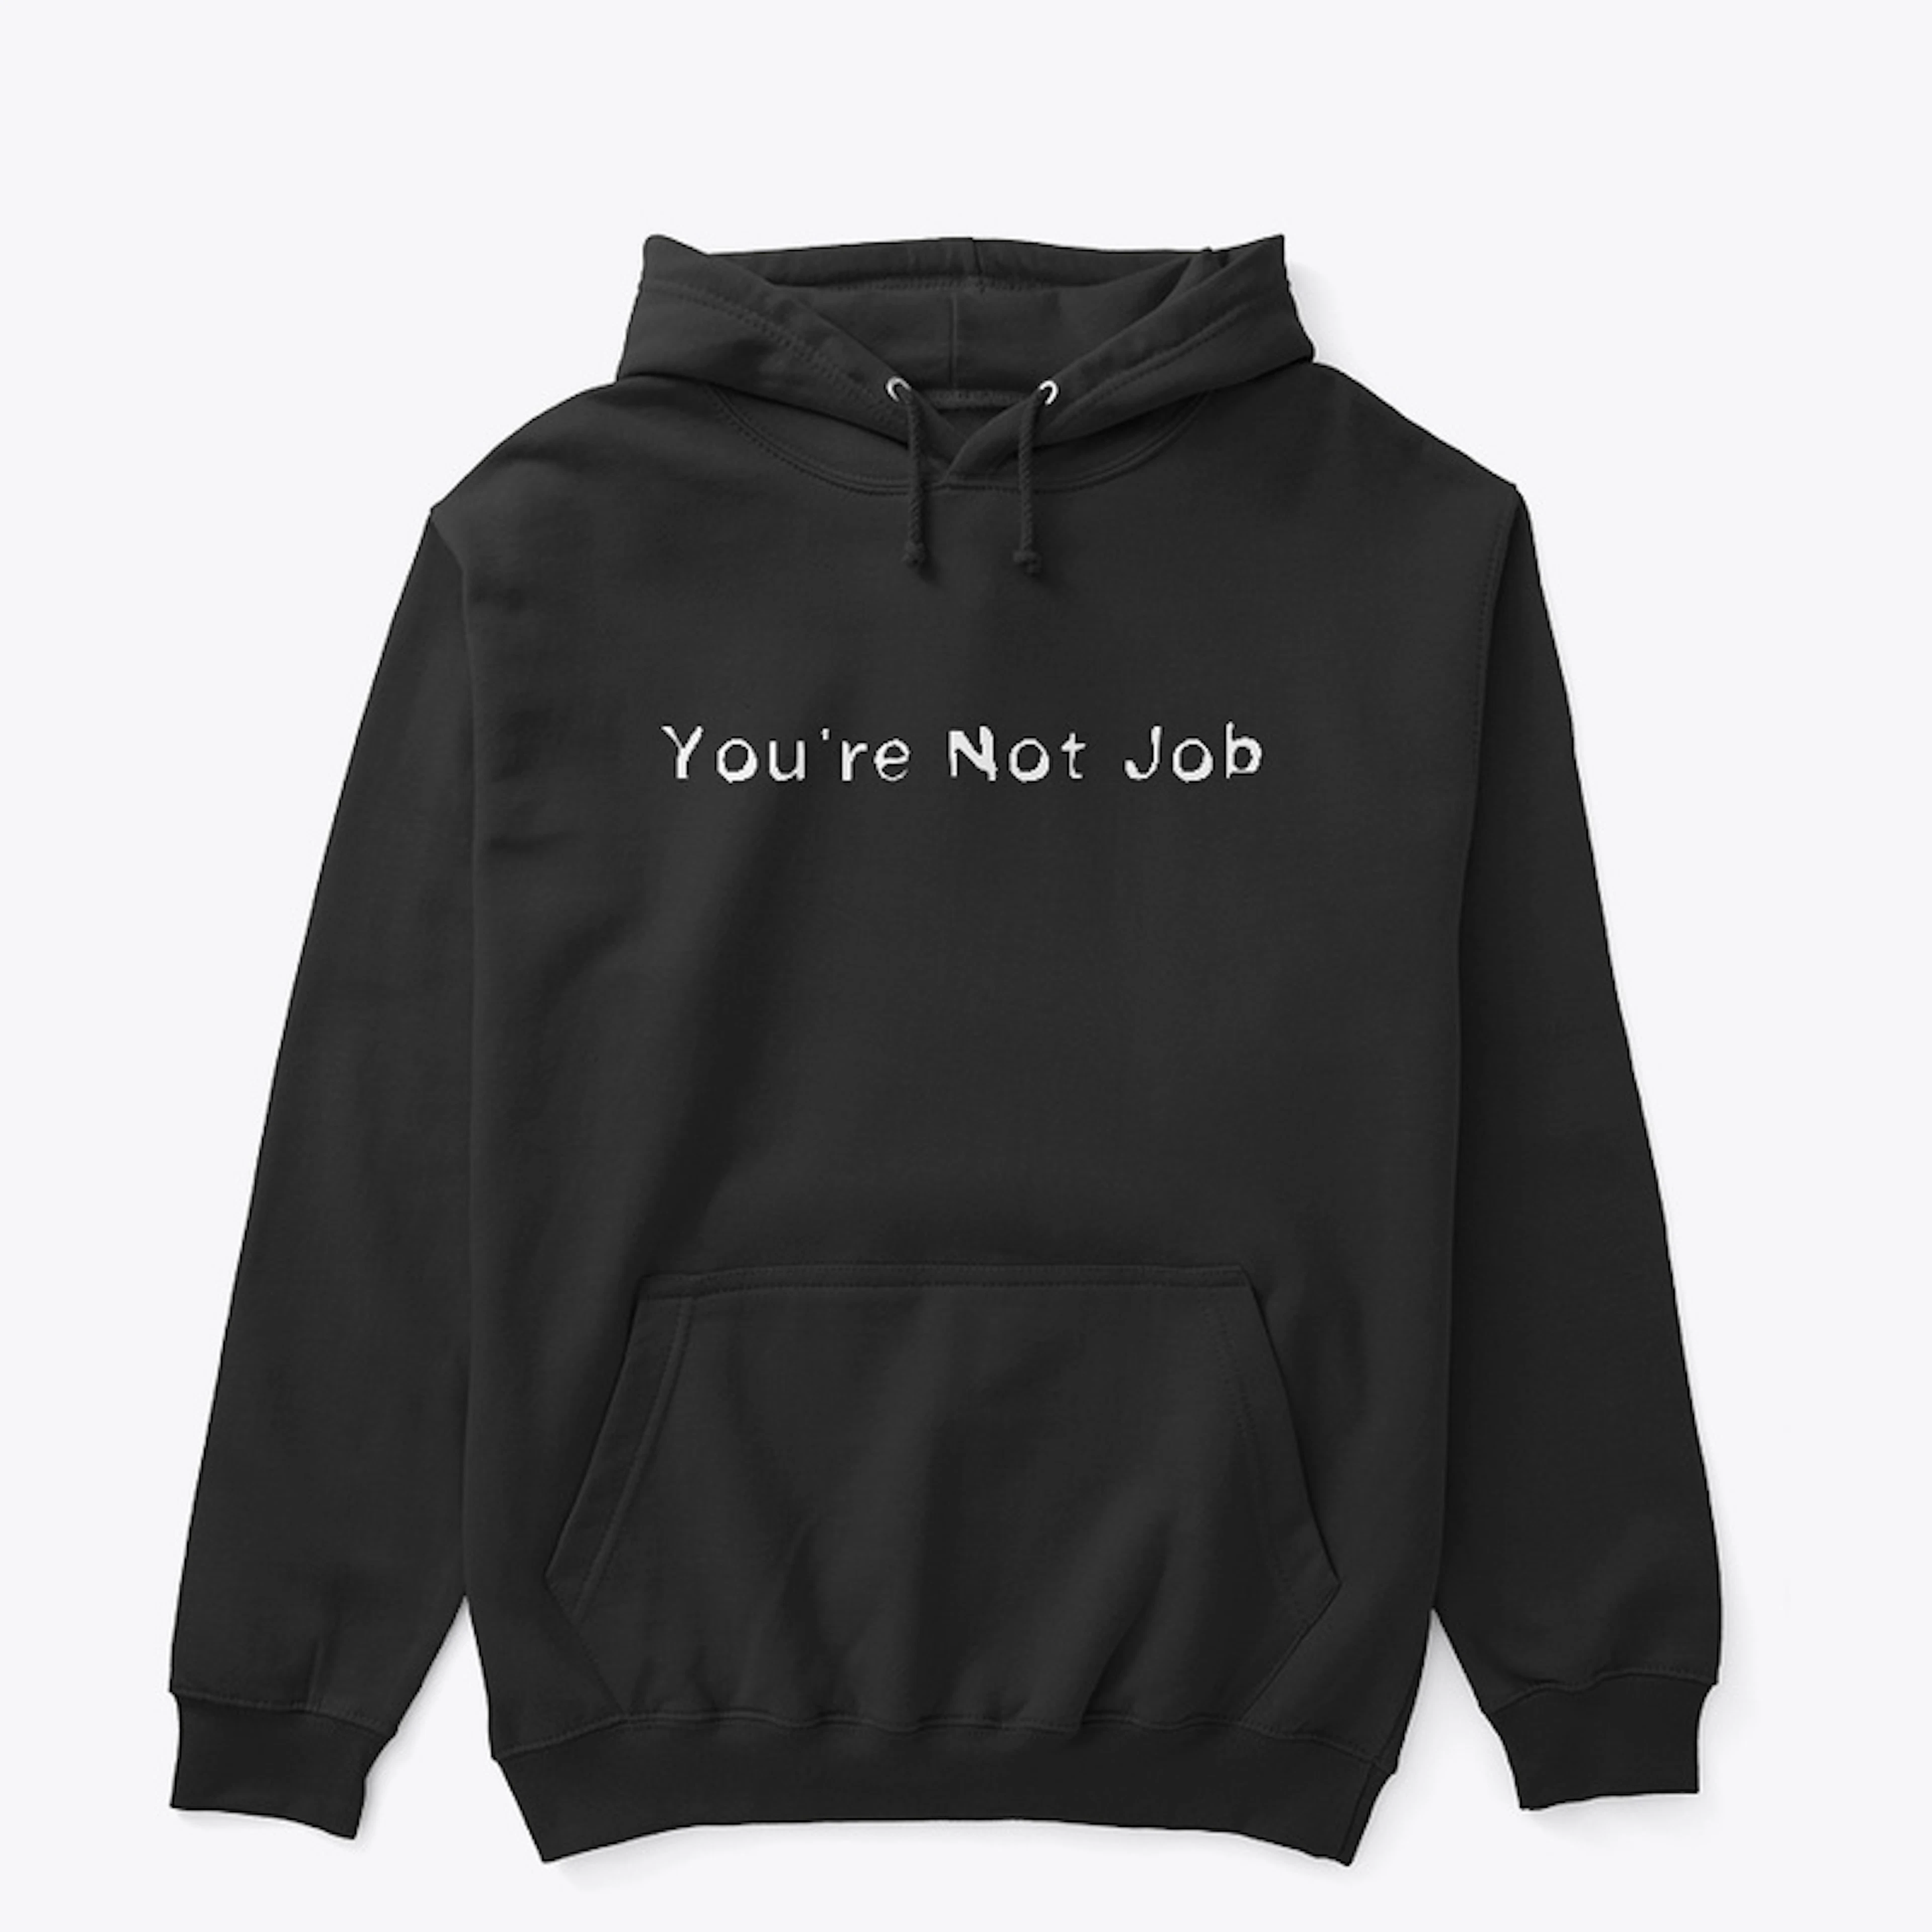 You're Not Job